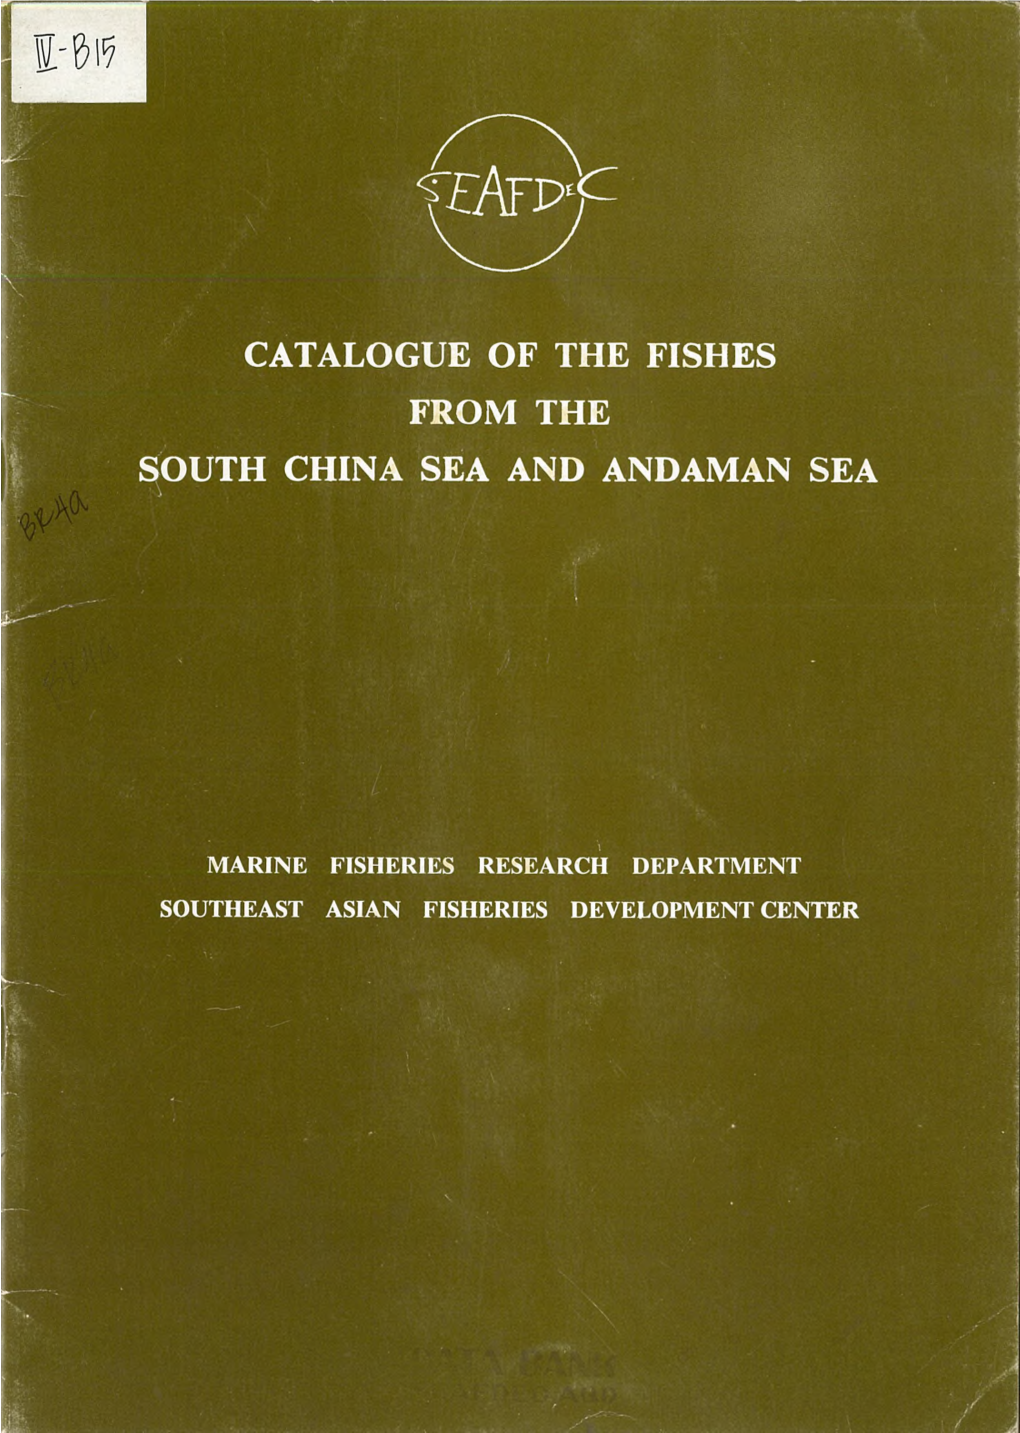 Catalogue of the Fishes from the South China Sea and Andaman Sea